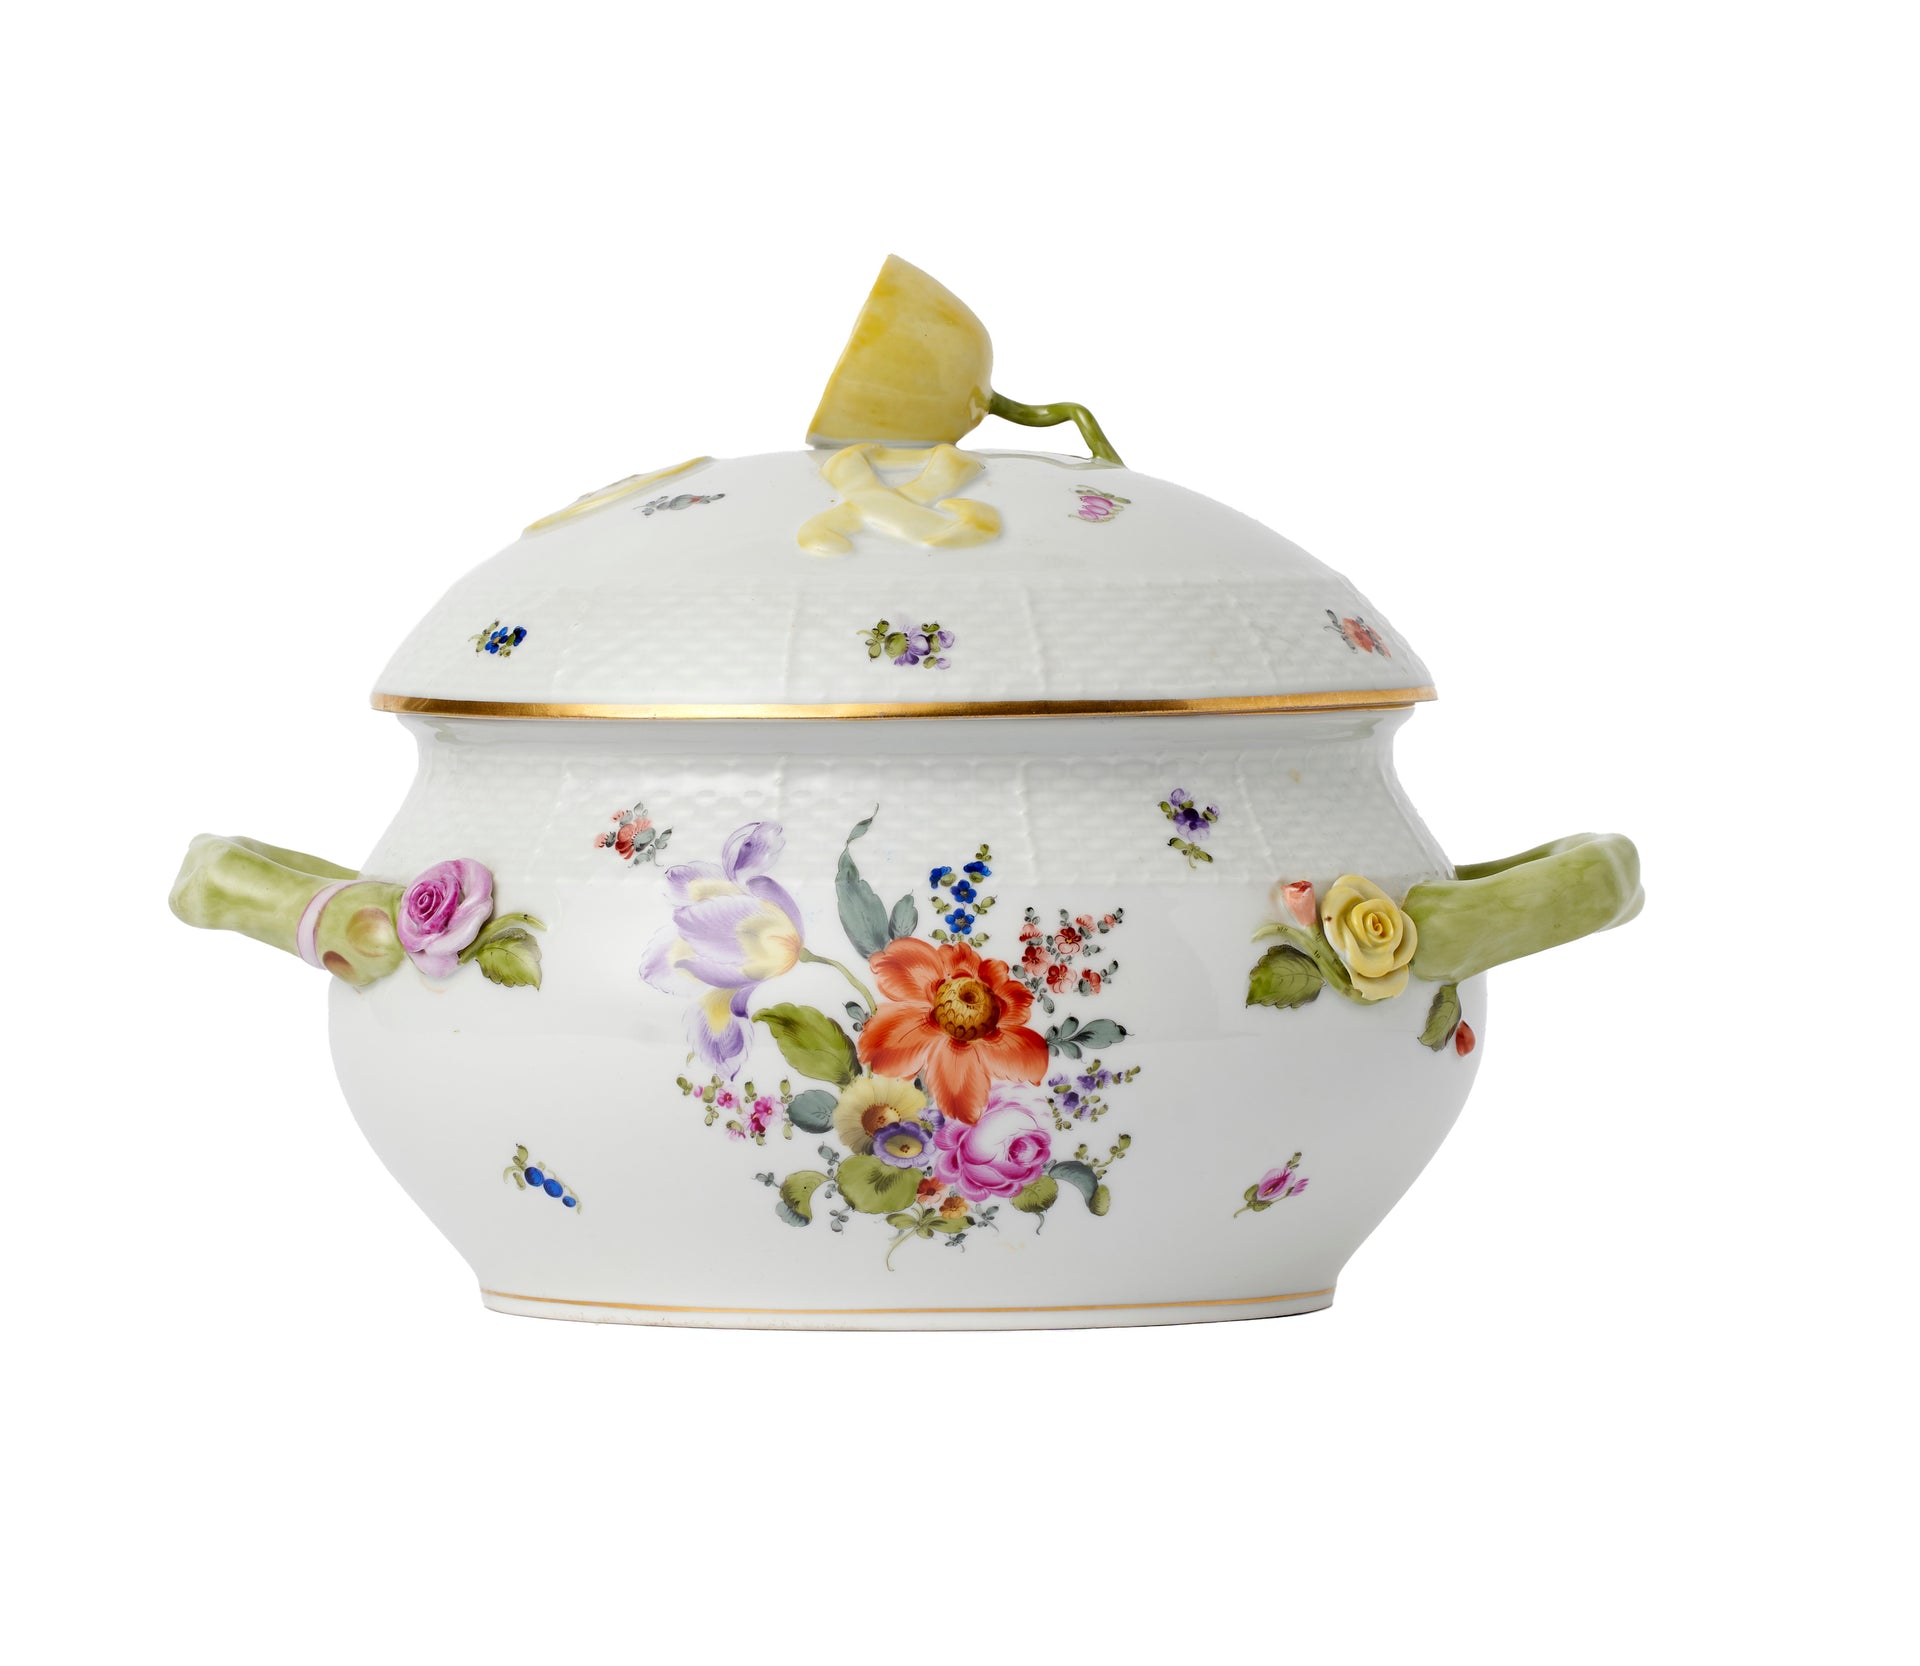 SOLD A fine quality hand-painted Herend porcelain tureen and cover, Hungarian circa 1950